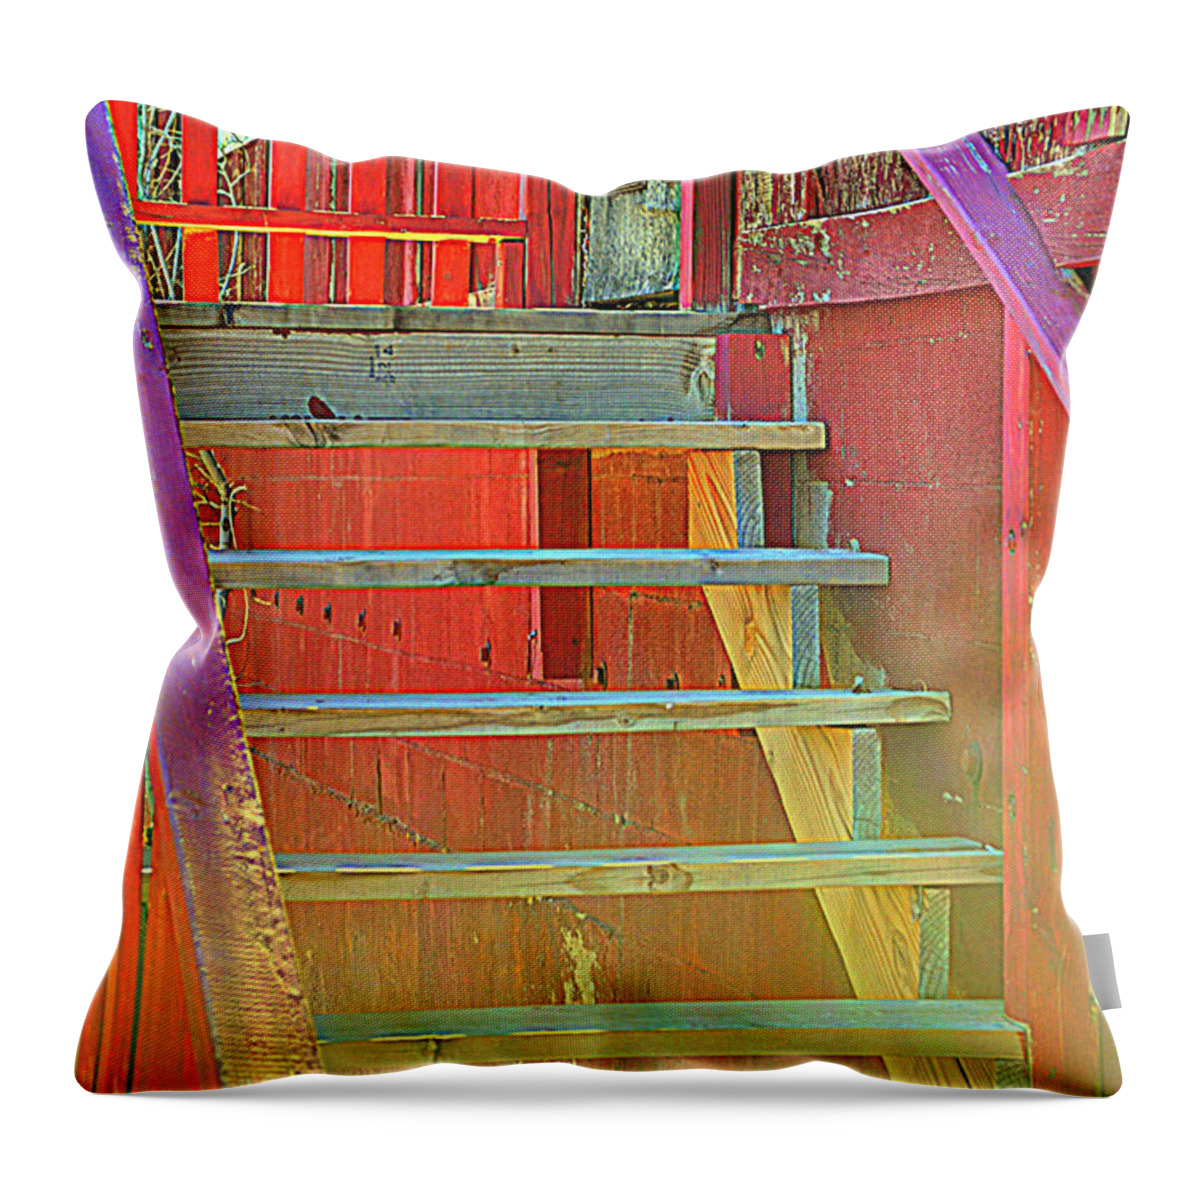 Old Wooden Stairway Throw Pillow featuring the photograph Rainbow Walk by Diane montana Jansson